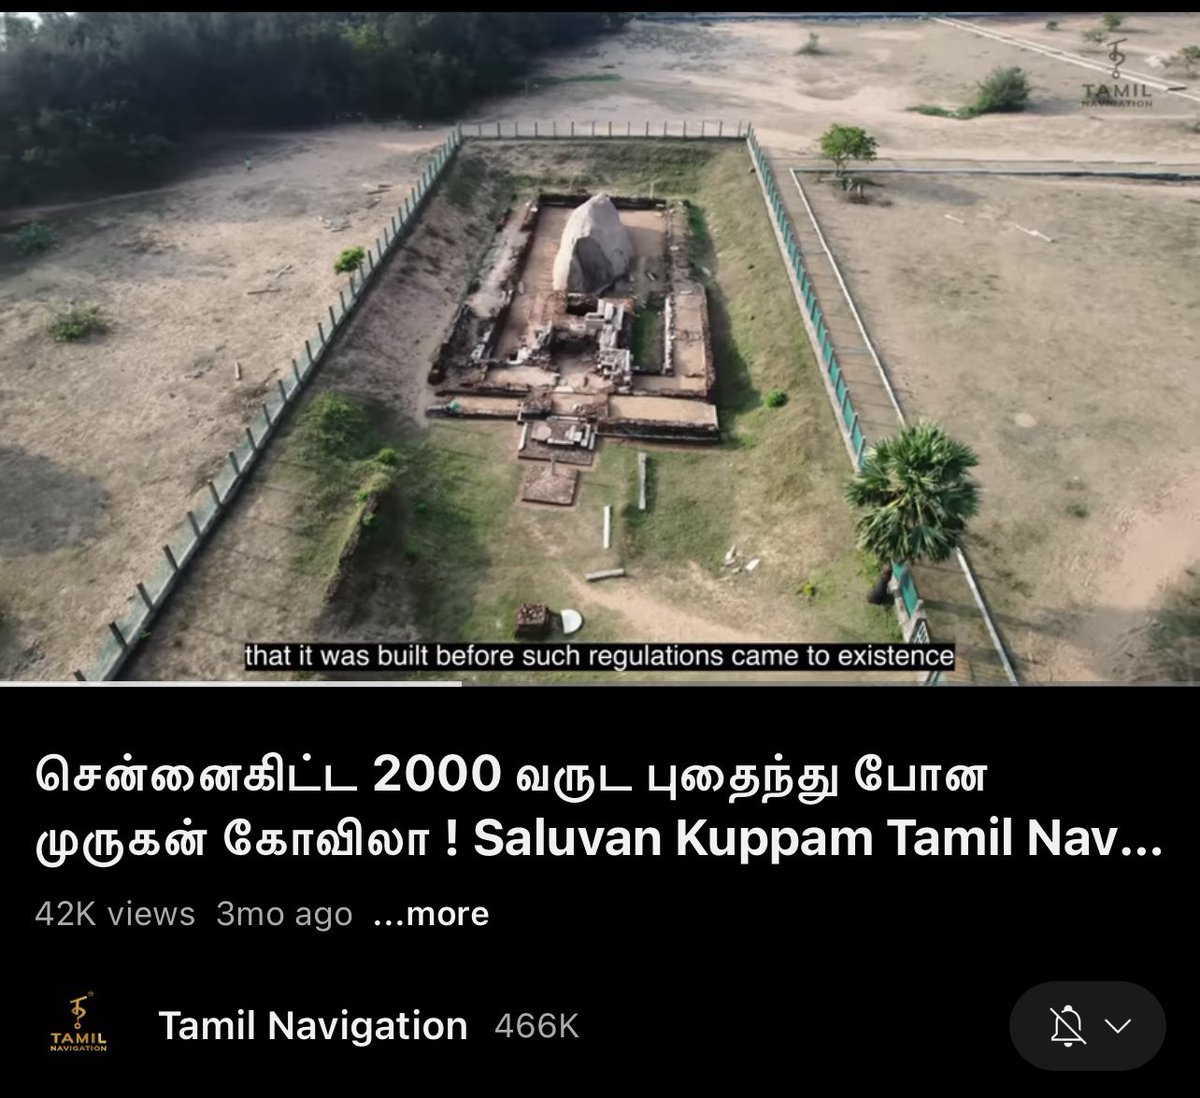 2000 year old temple found in Chennai after Tsunami in 2004 https://t.co/qdOn3AWZyJ